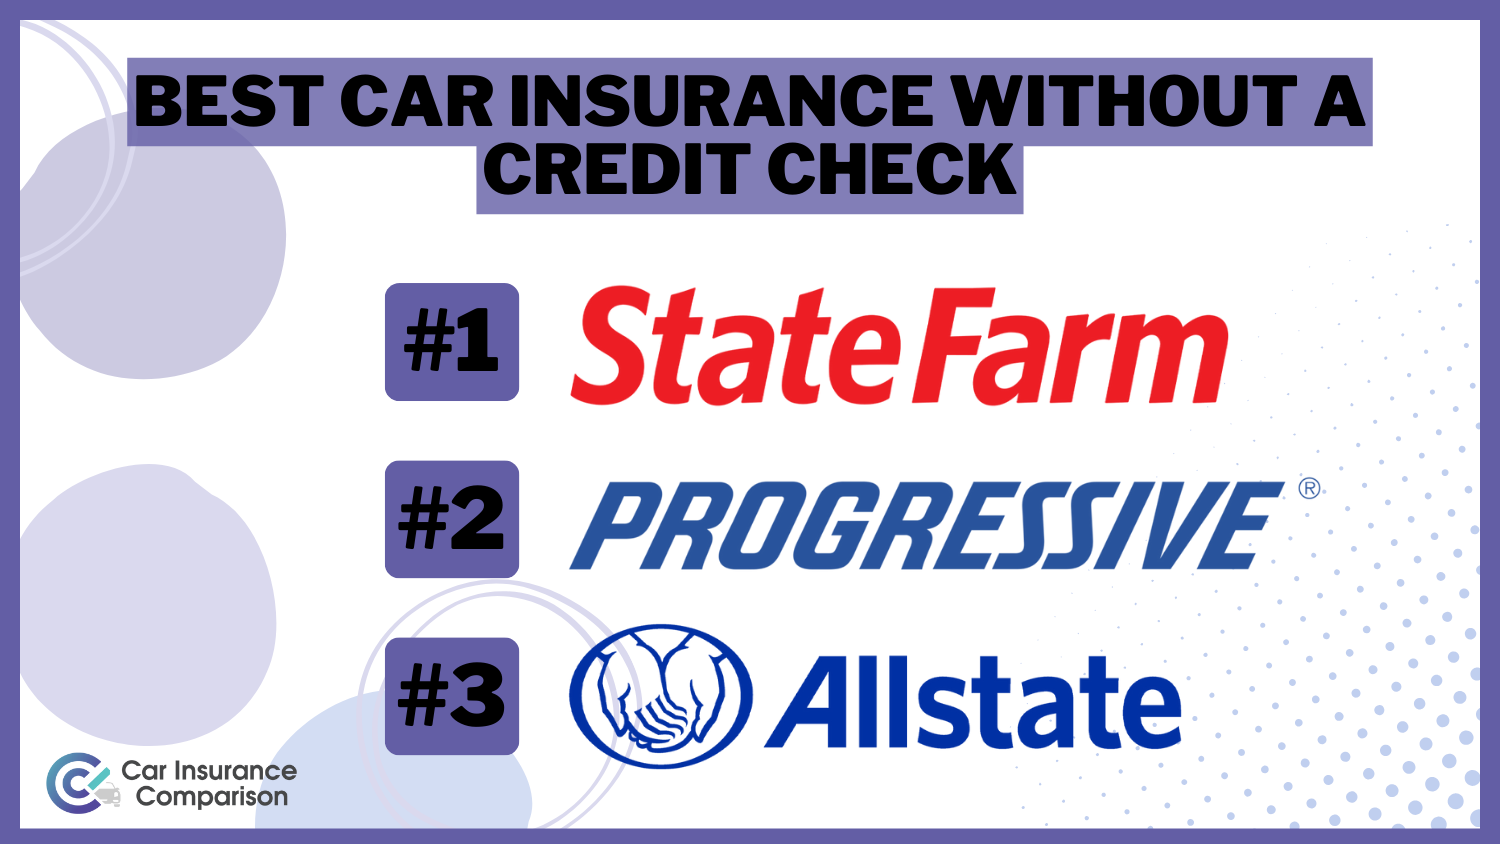 State Farm, Progressive Allstate: Best Car Insurance Without a Credit Check 